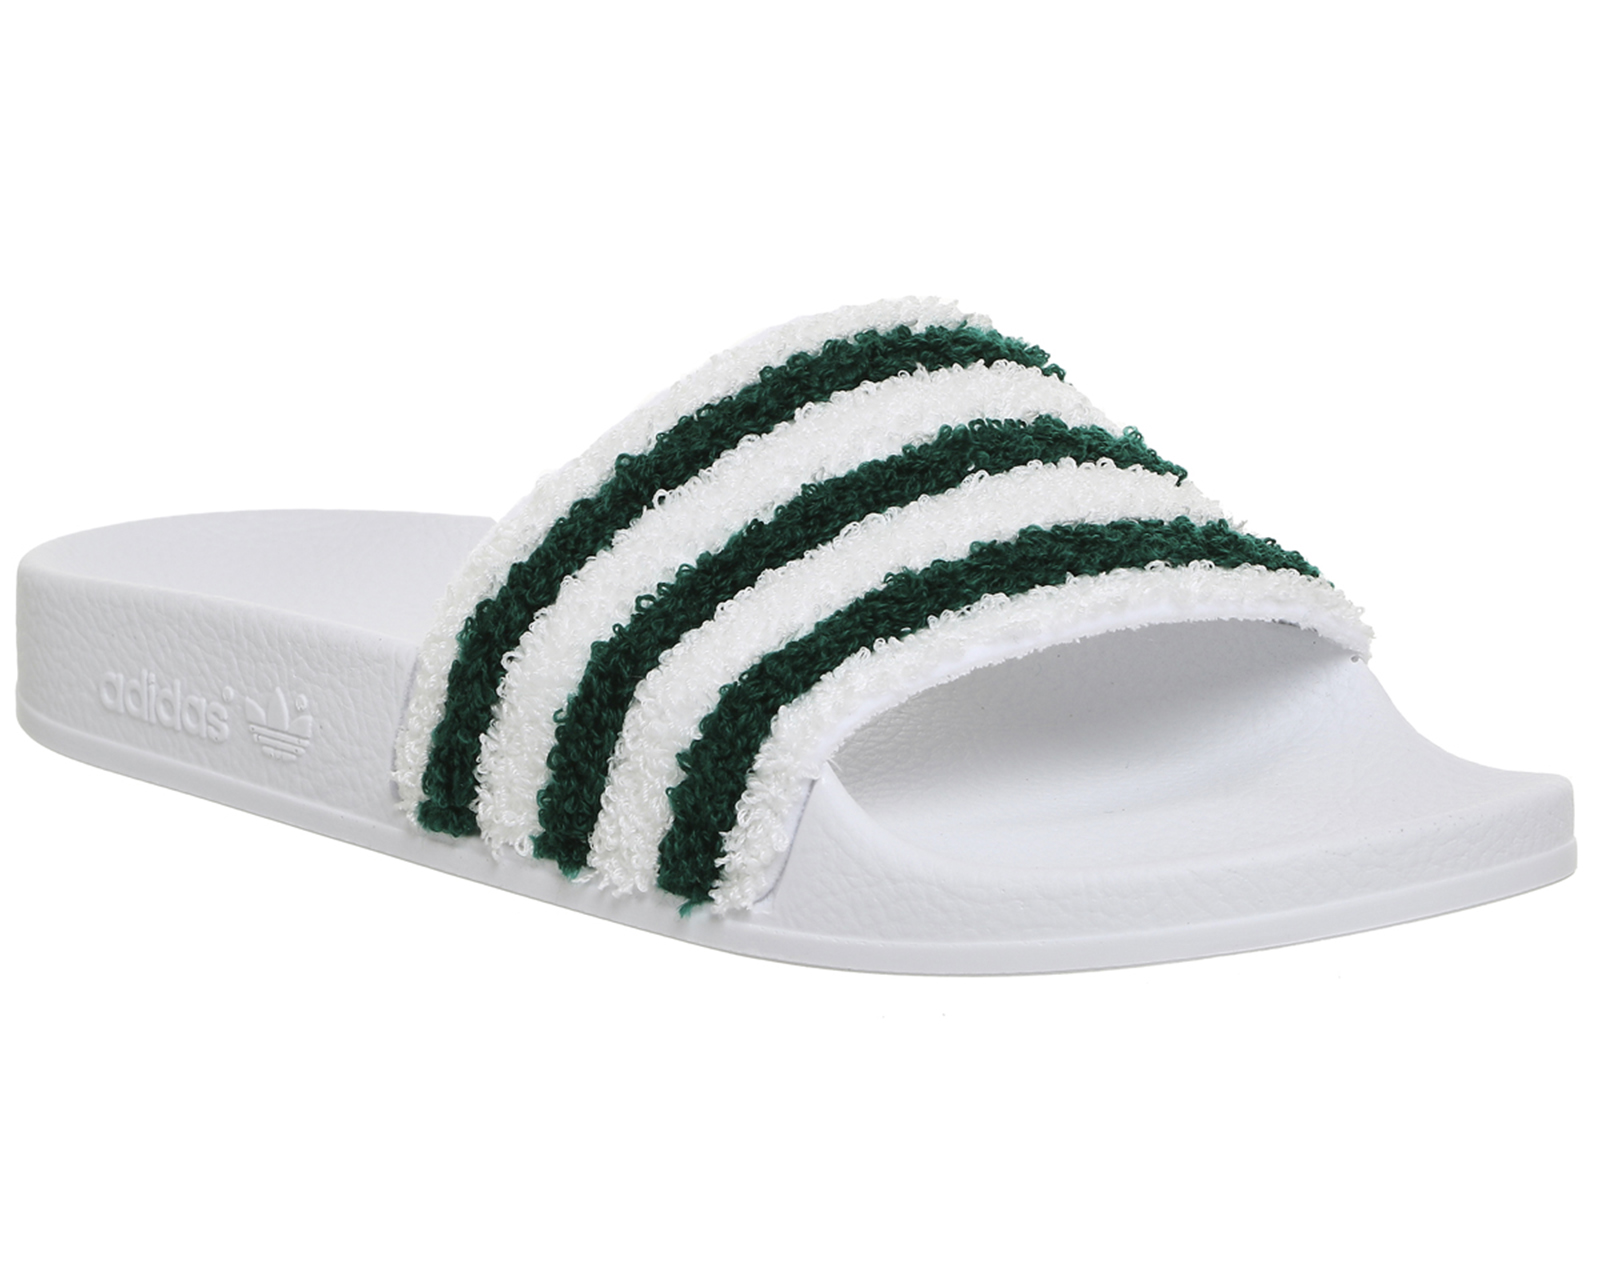 adidas sliders green and white